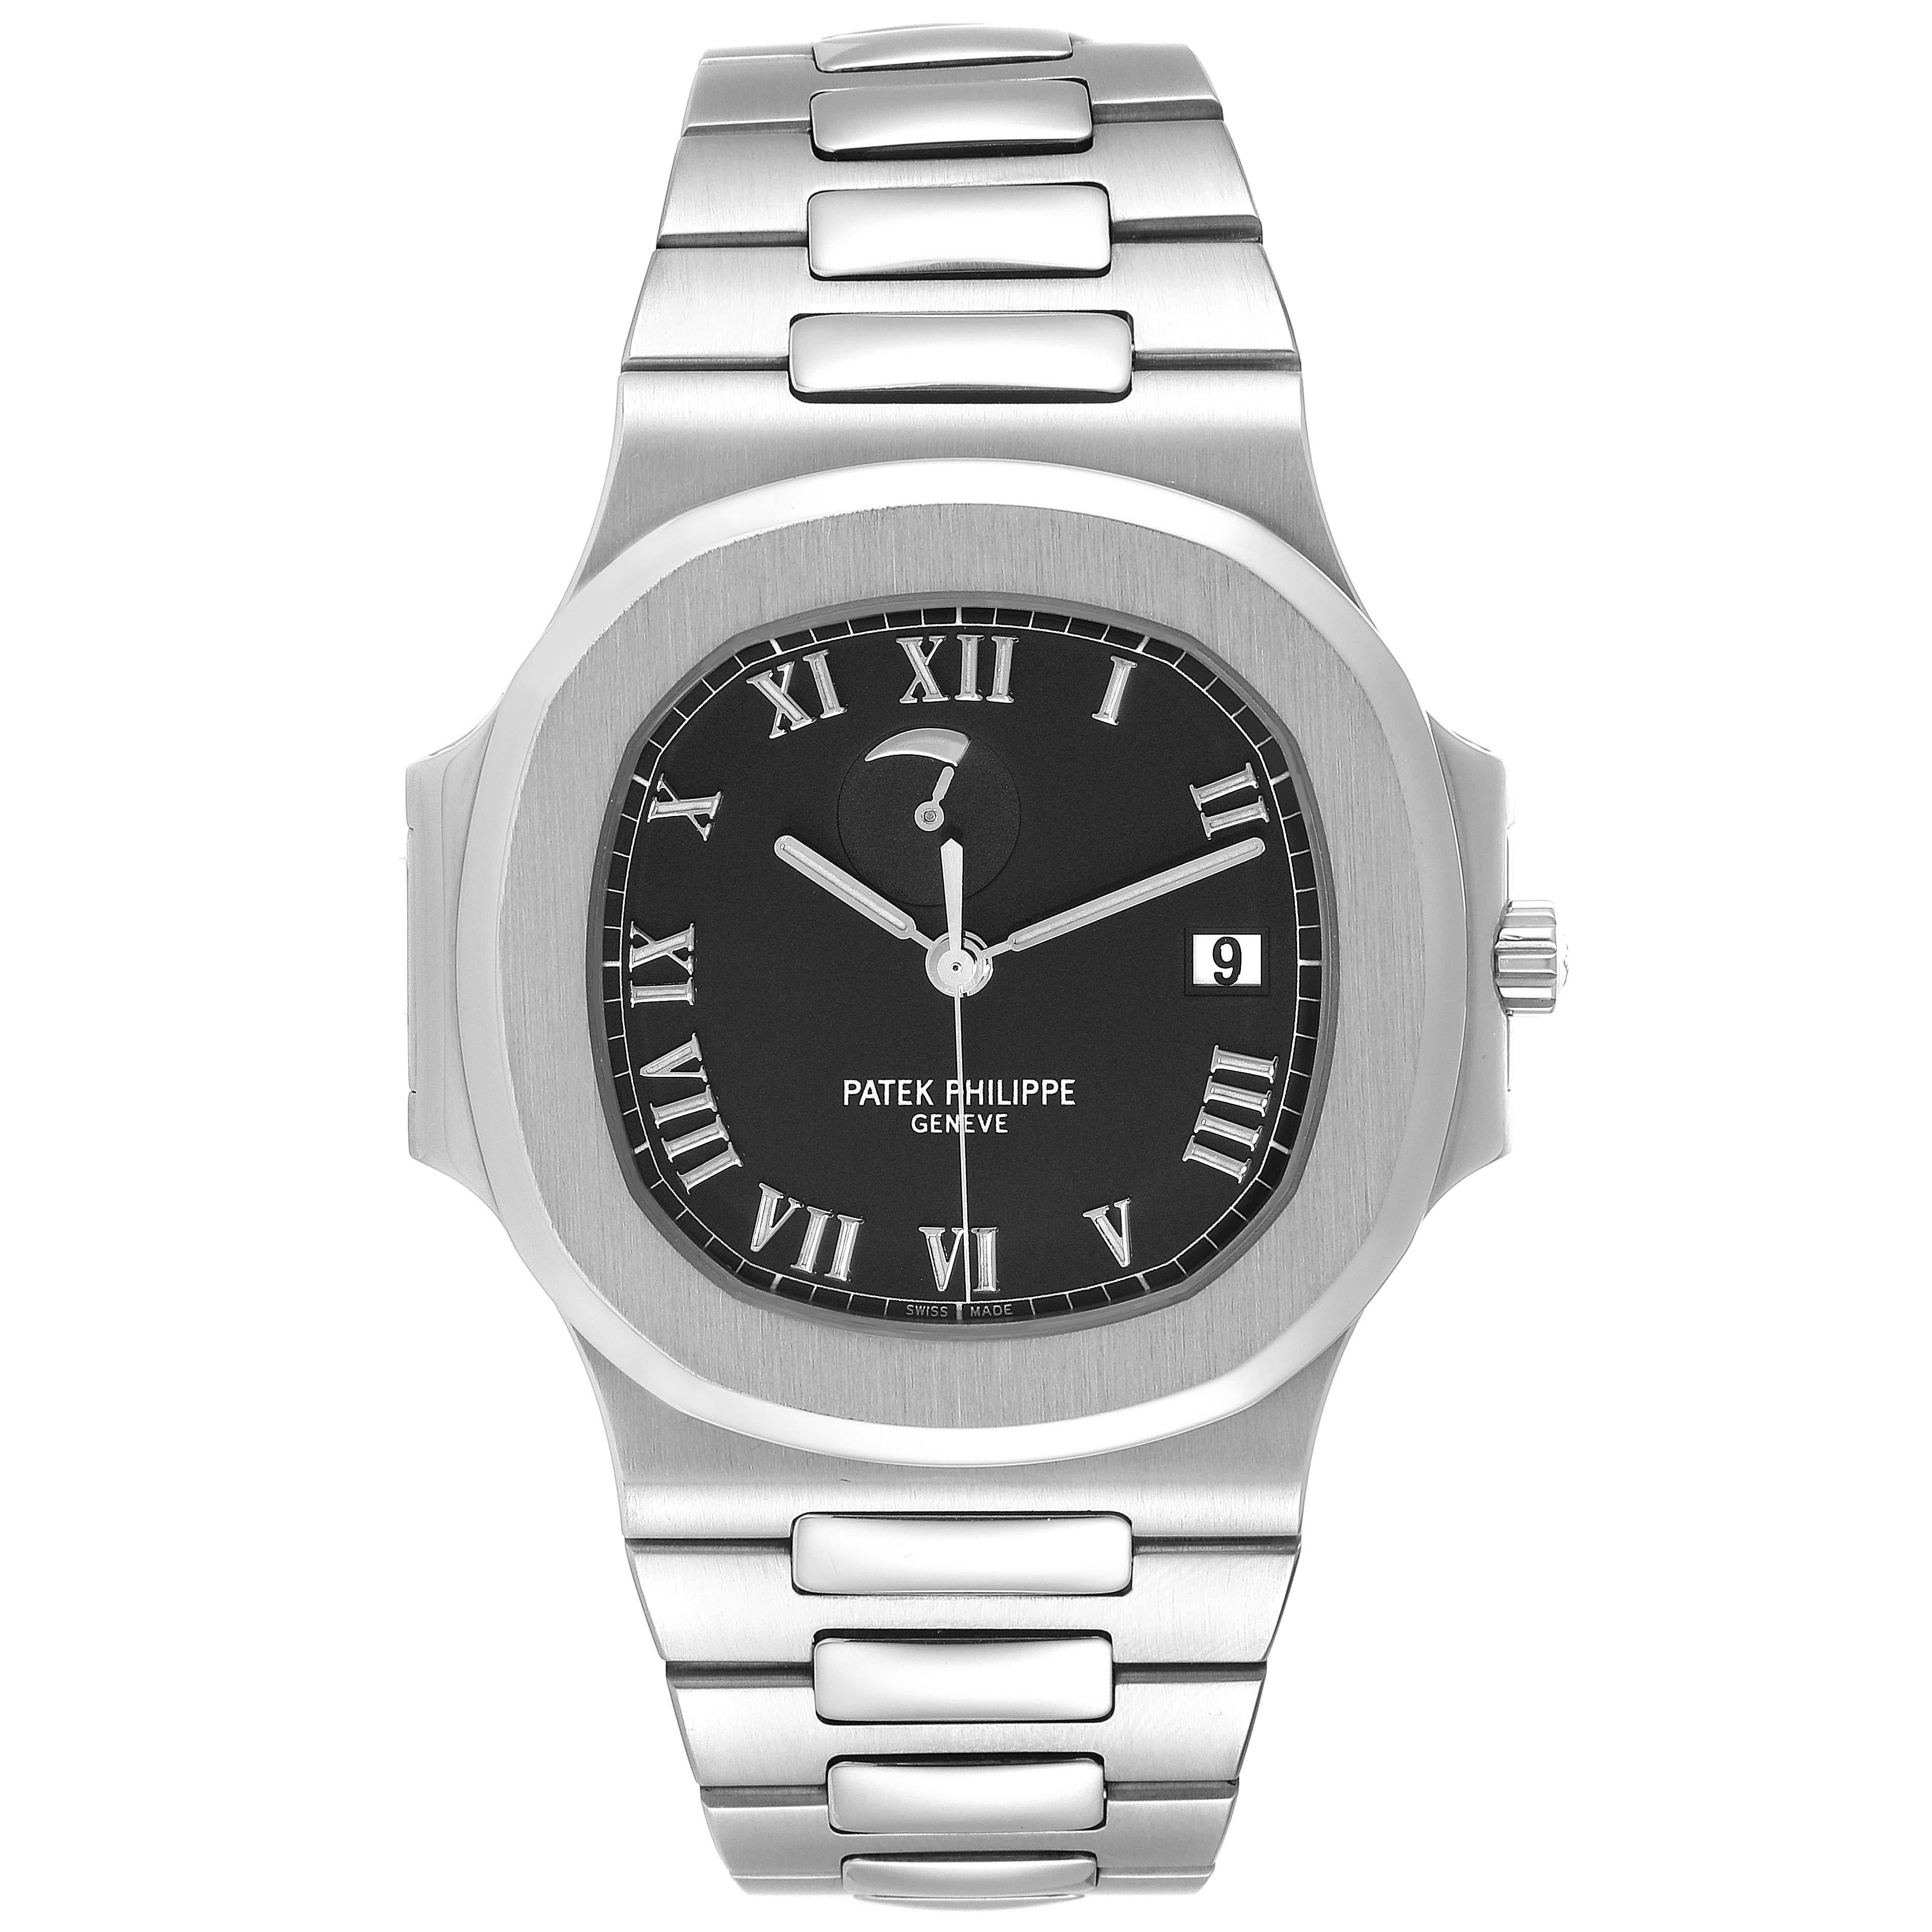 Patek Philippe Nautilus Power Reserve Steel Mens Watch 3710. Automatic self-winding movement. Stainless steel cushion shape case 42 x 42 mm. Stainless steel bezel. Scratch resistant sapphire crystal. Black dial with applied luminous Roman numerals,